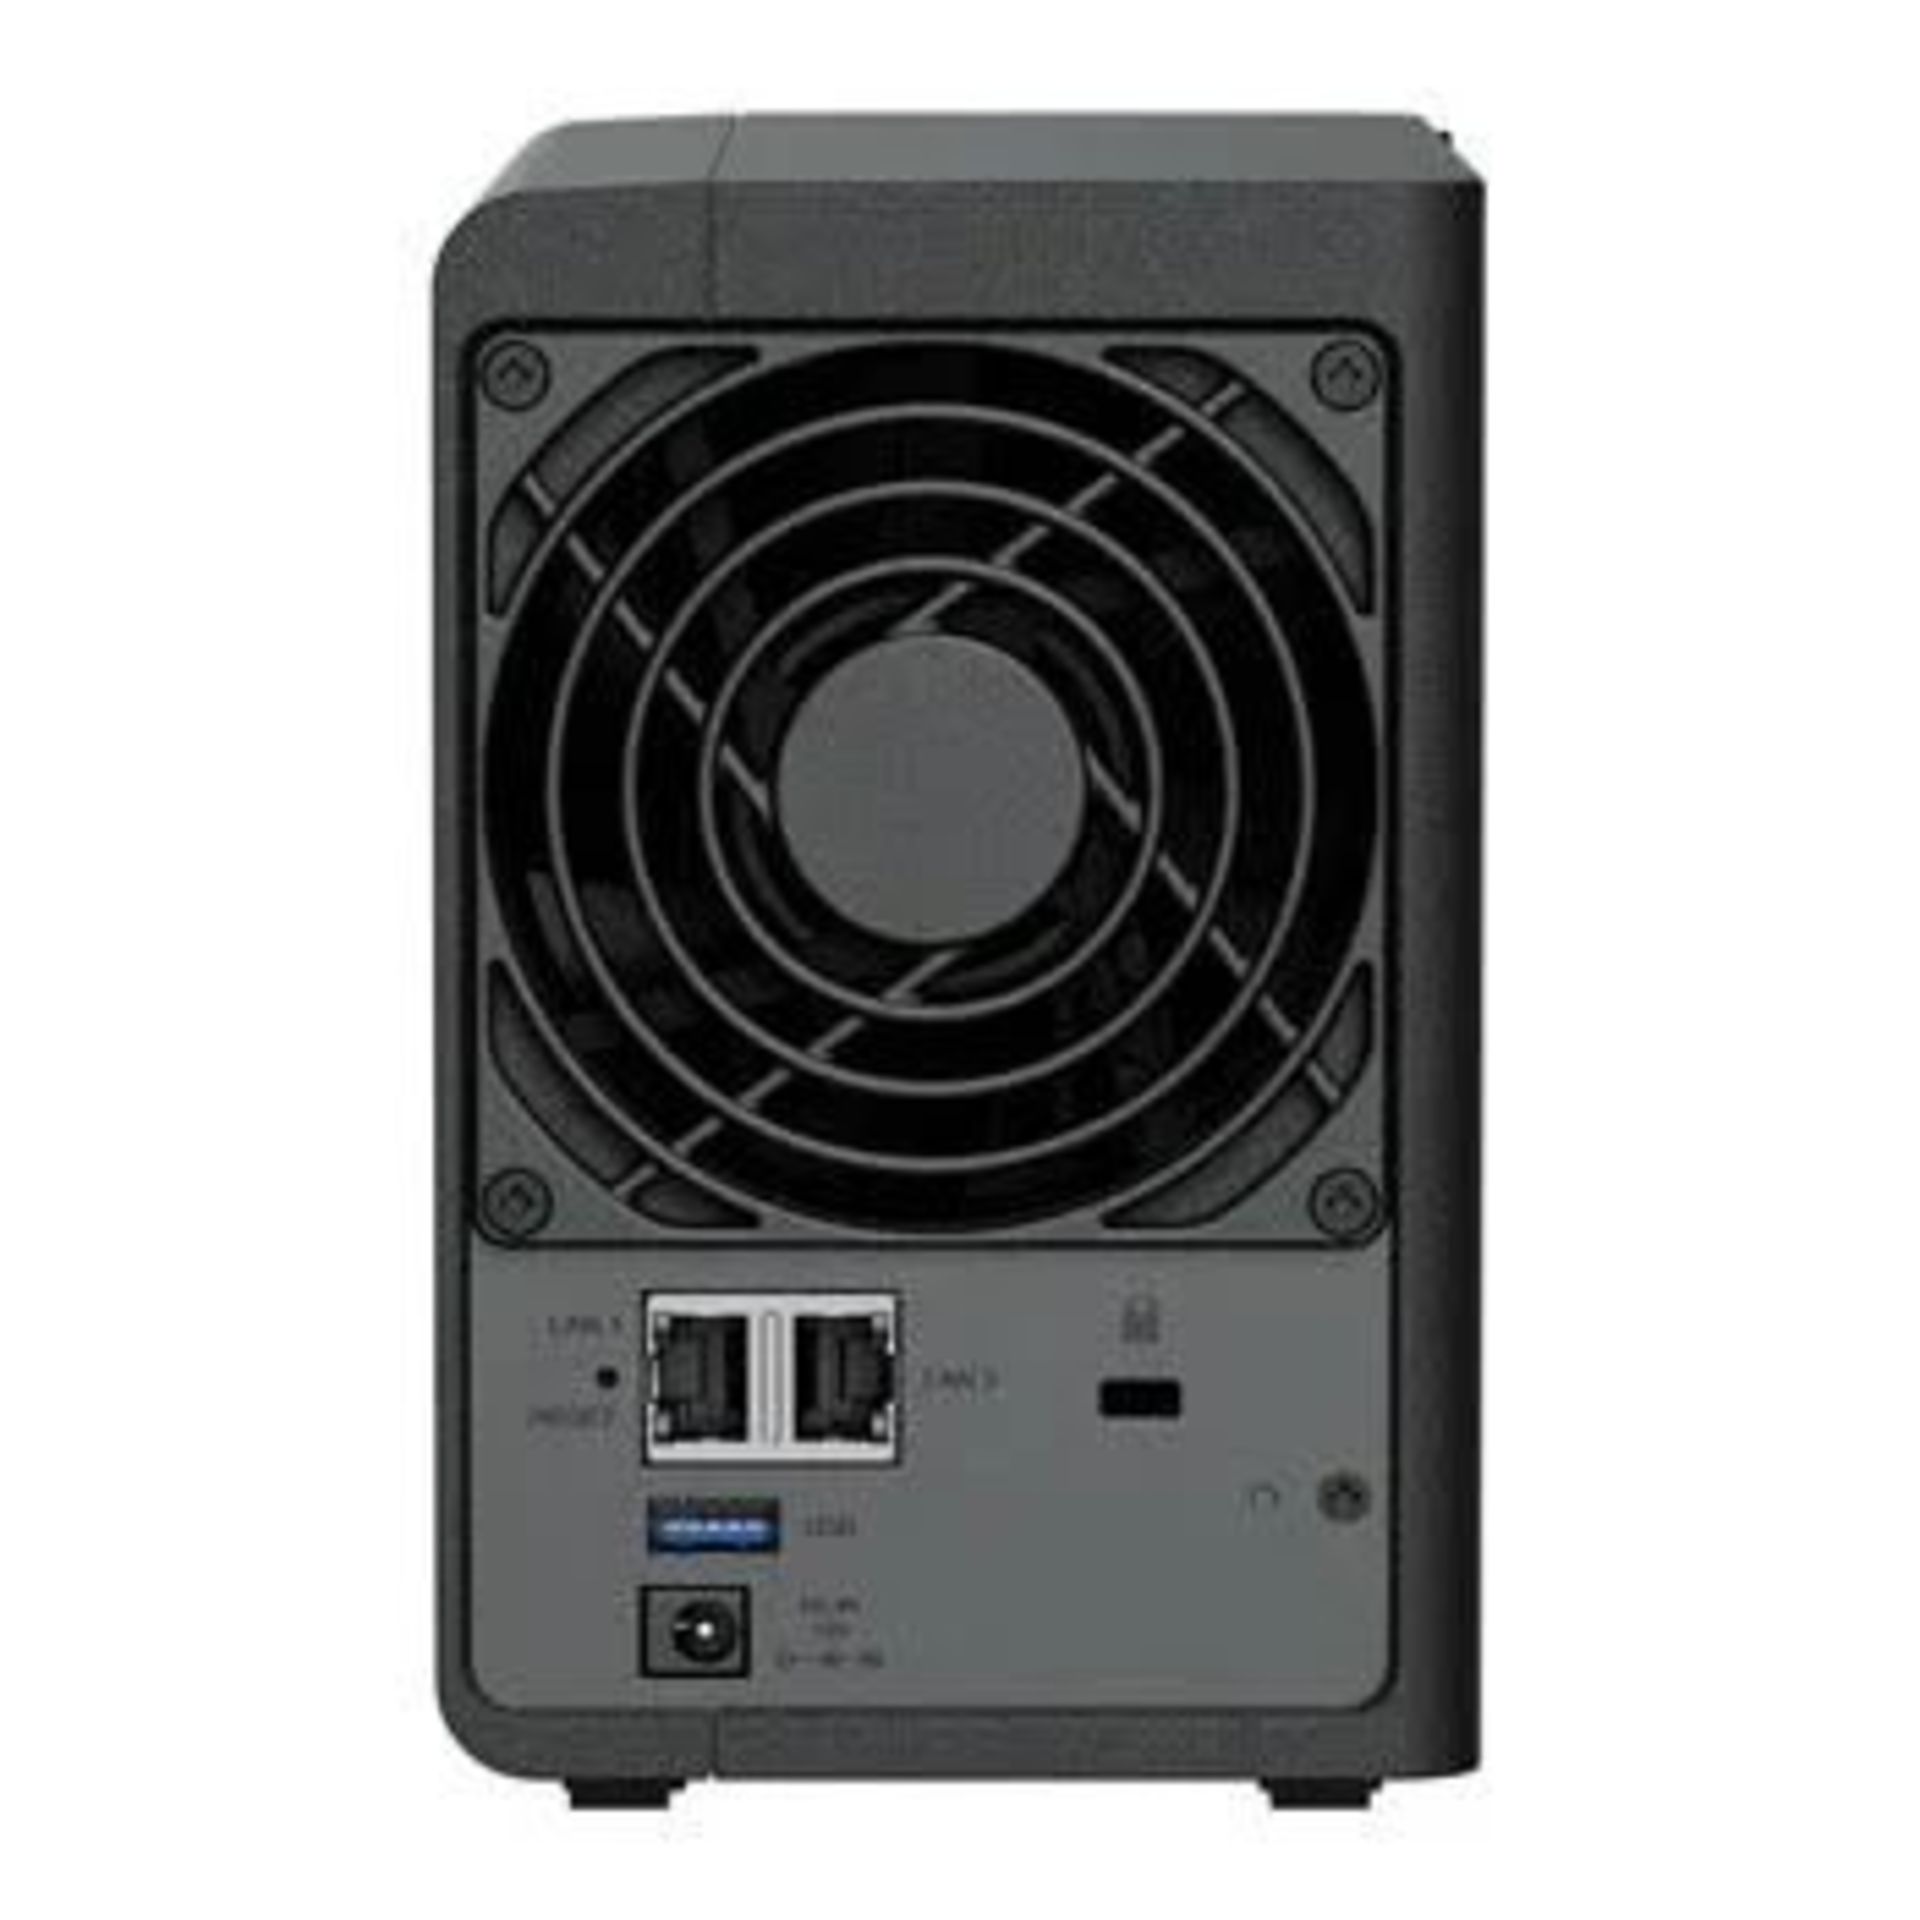 Synology DiskStation® DS224+. - P2. RRP £500.00. Protect all your data with integrated security - Image 2 of 2